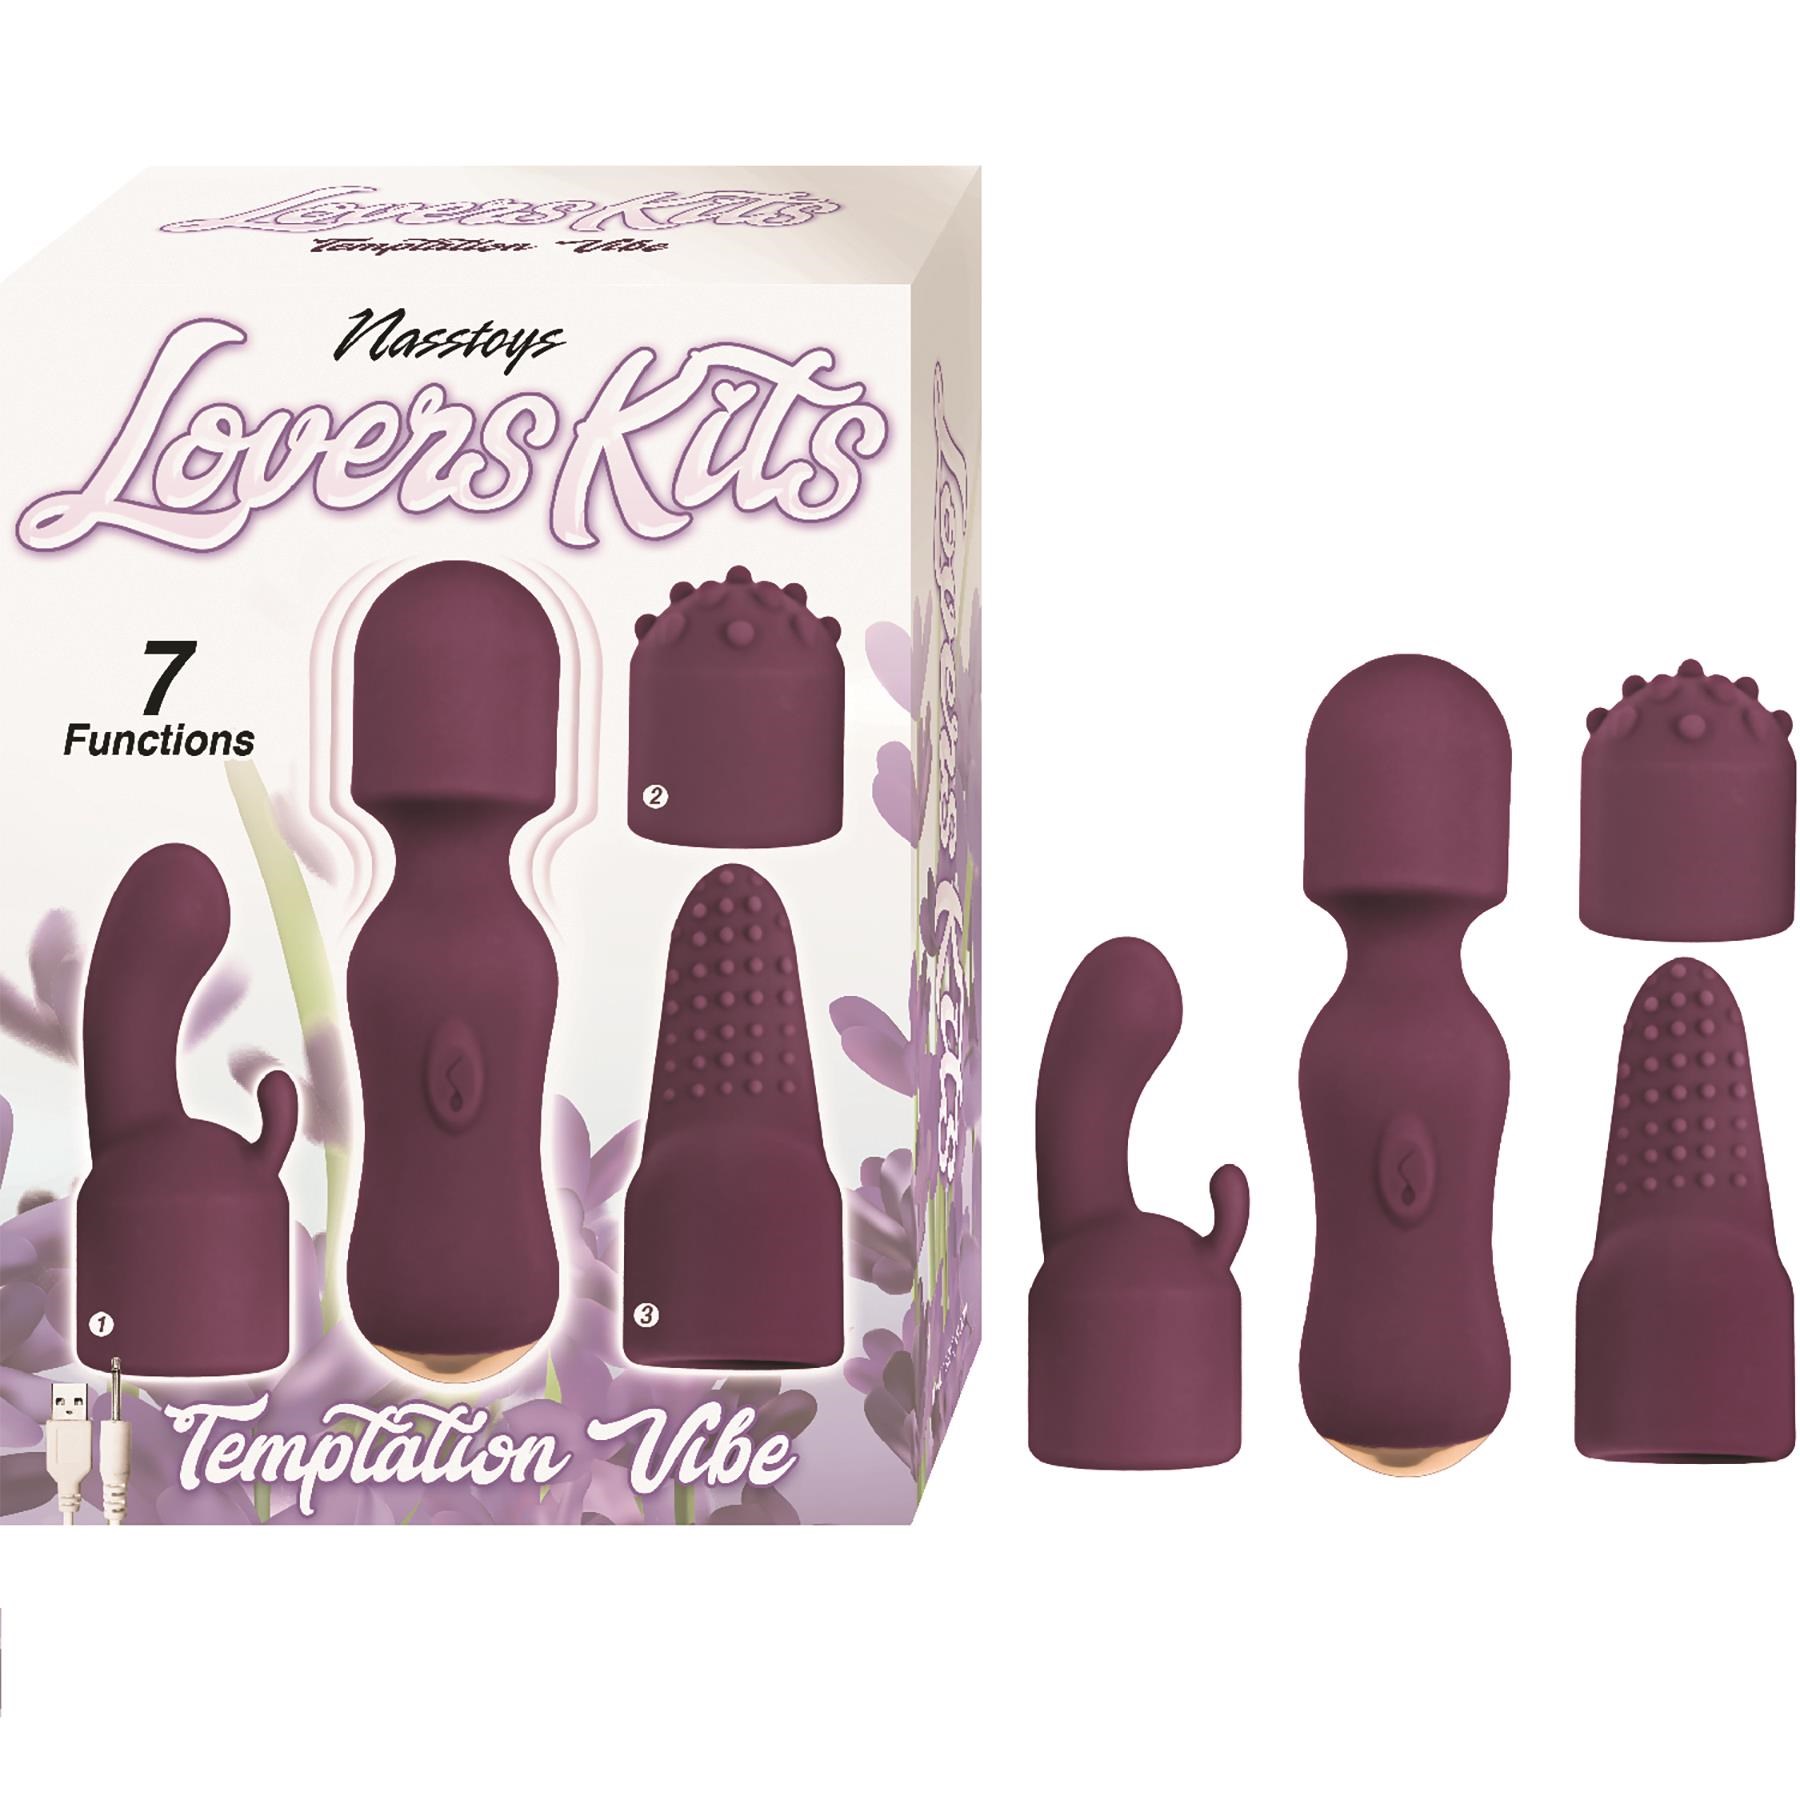 Lover's Kits Temptation Vibrator Kit - Product and Packaging